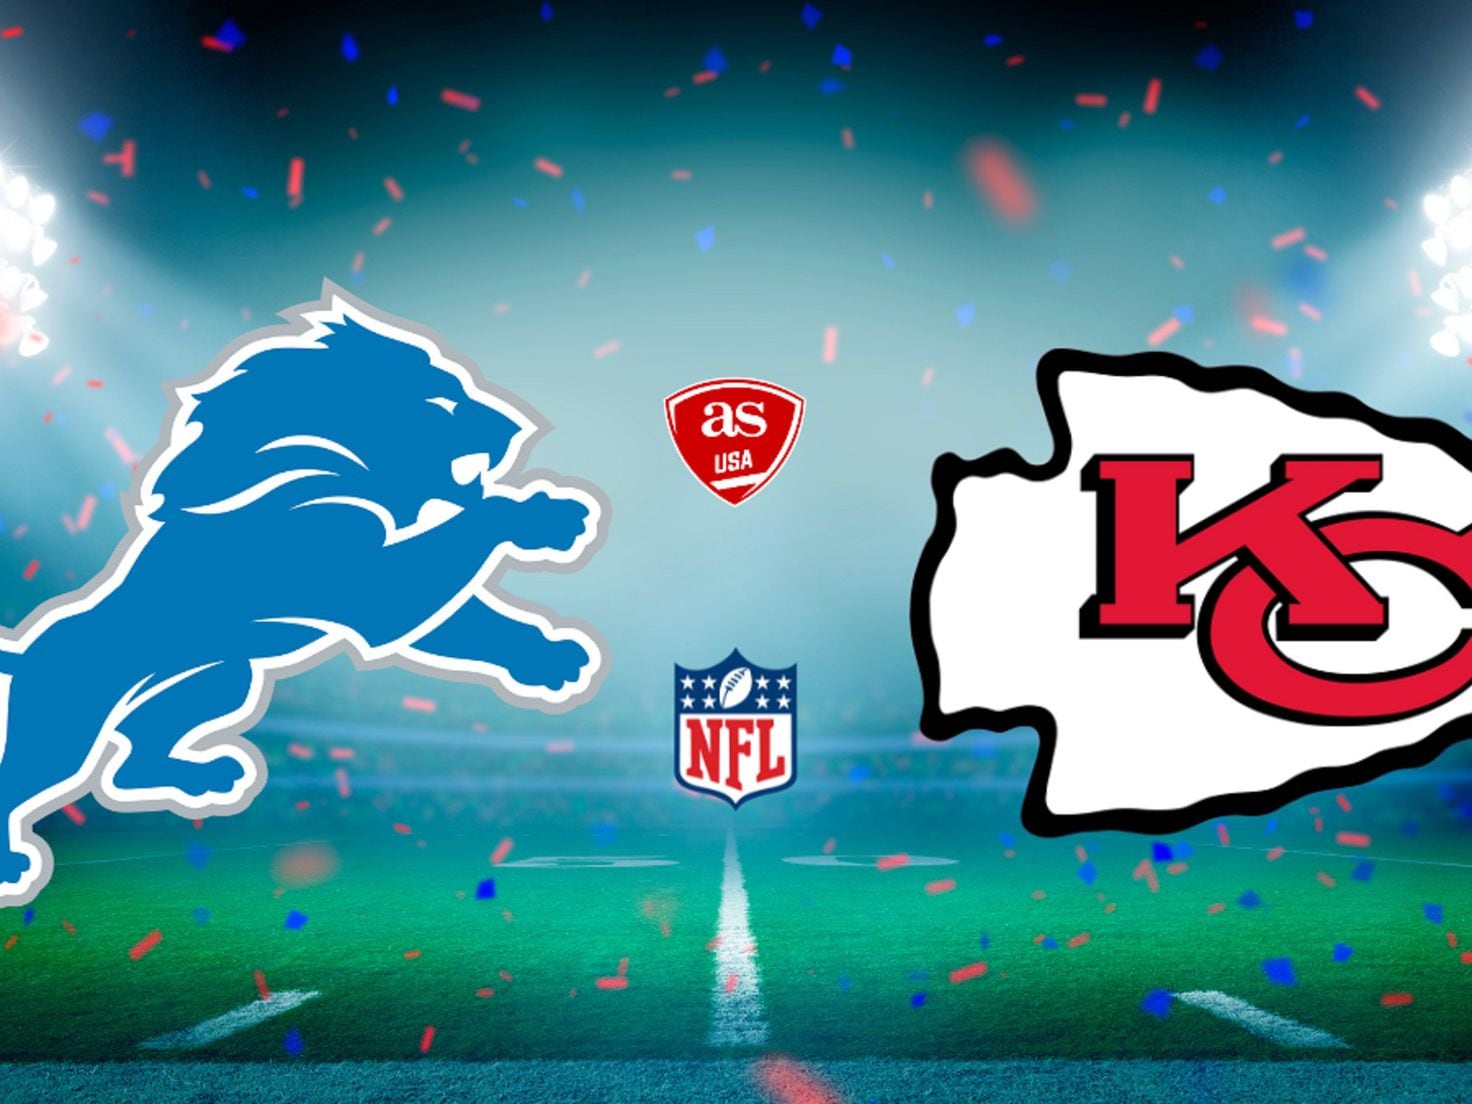 NFL on TV today (9/22/19): What time, channel is Detroit Lions vs